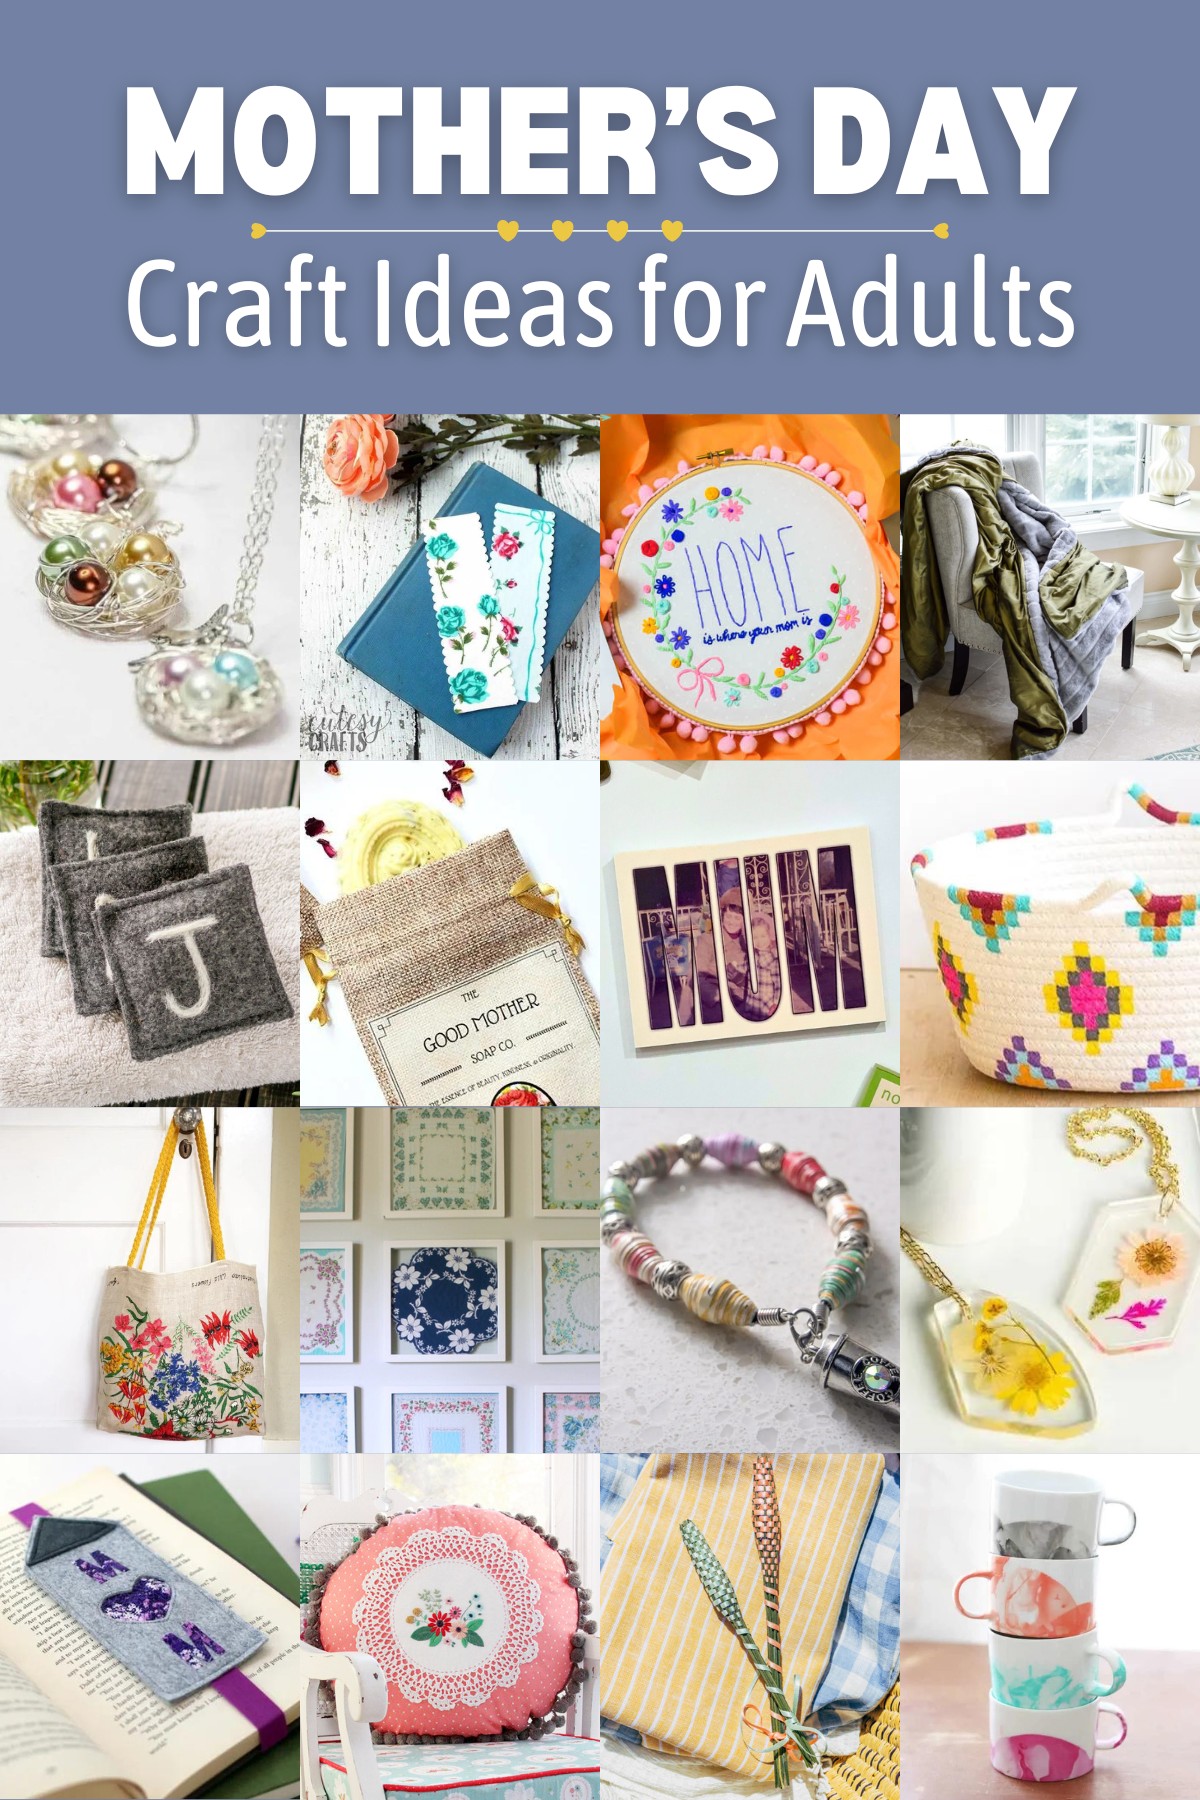 Mother's Day craft ideas for adults